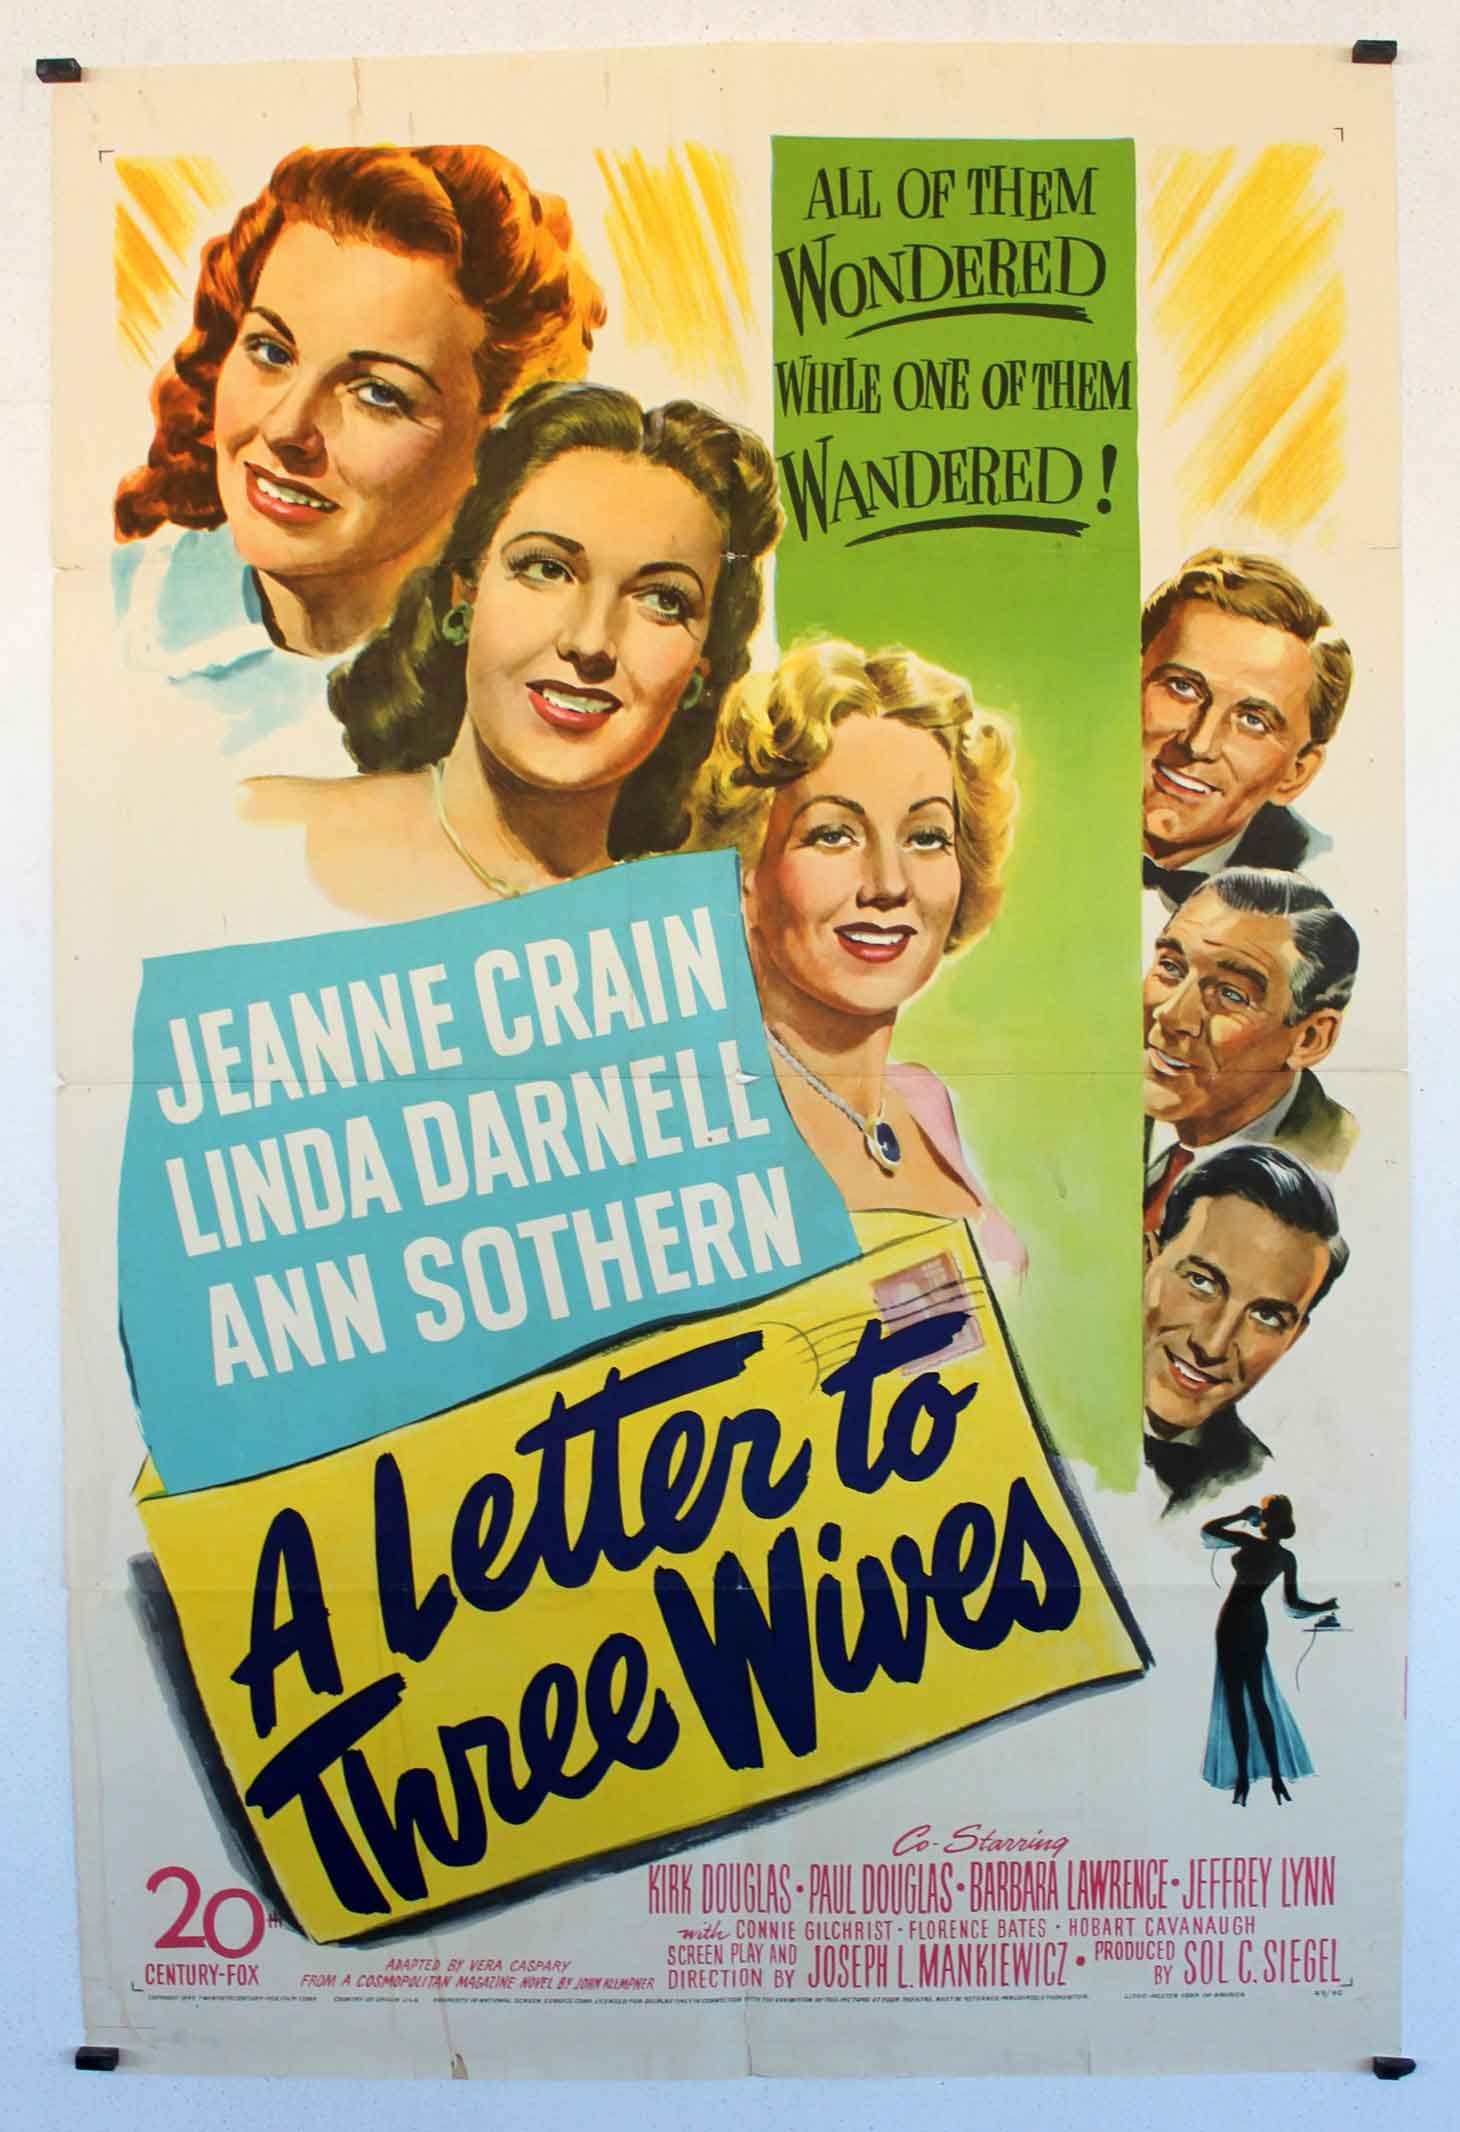 A LETTER TO THREE WIVES